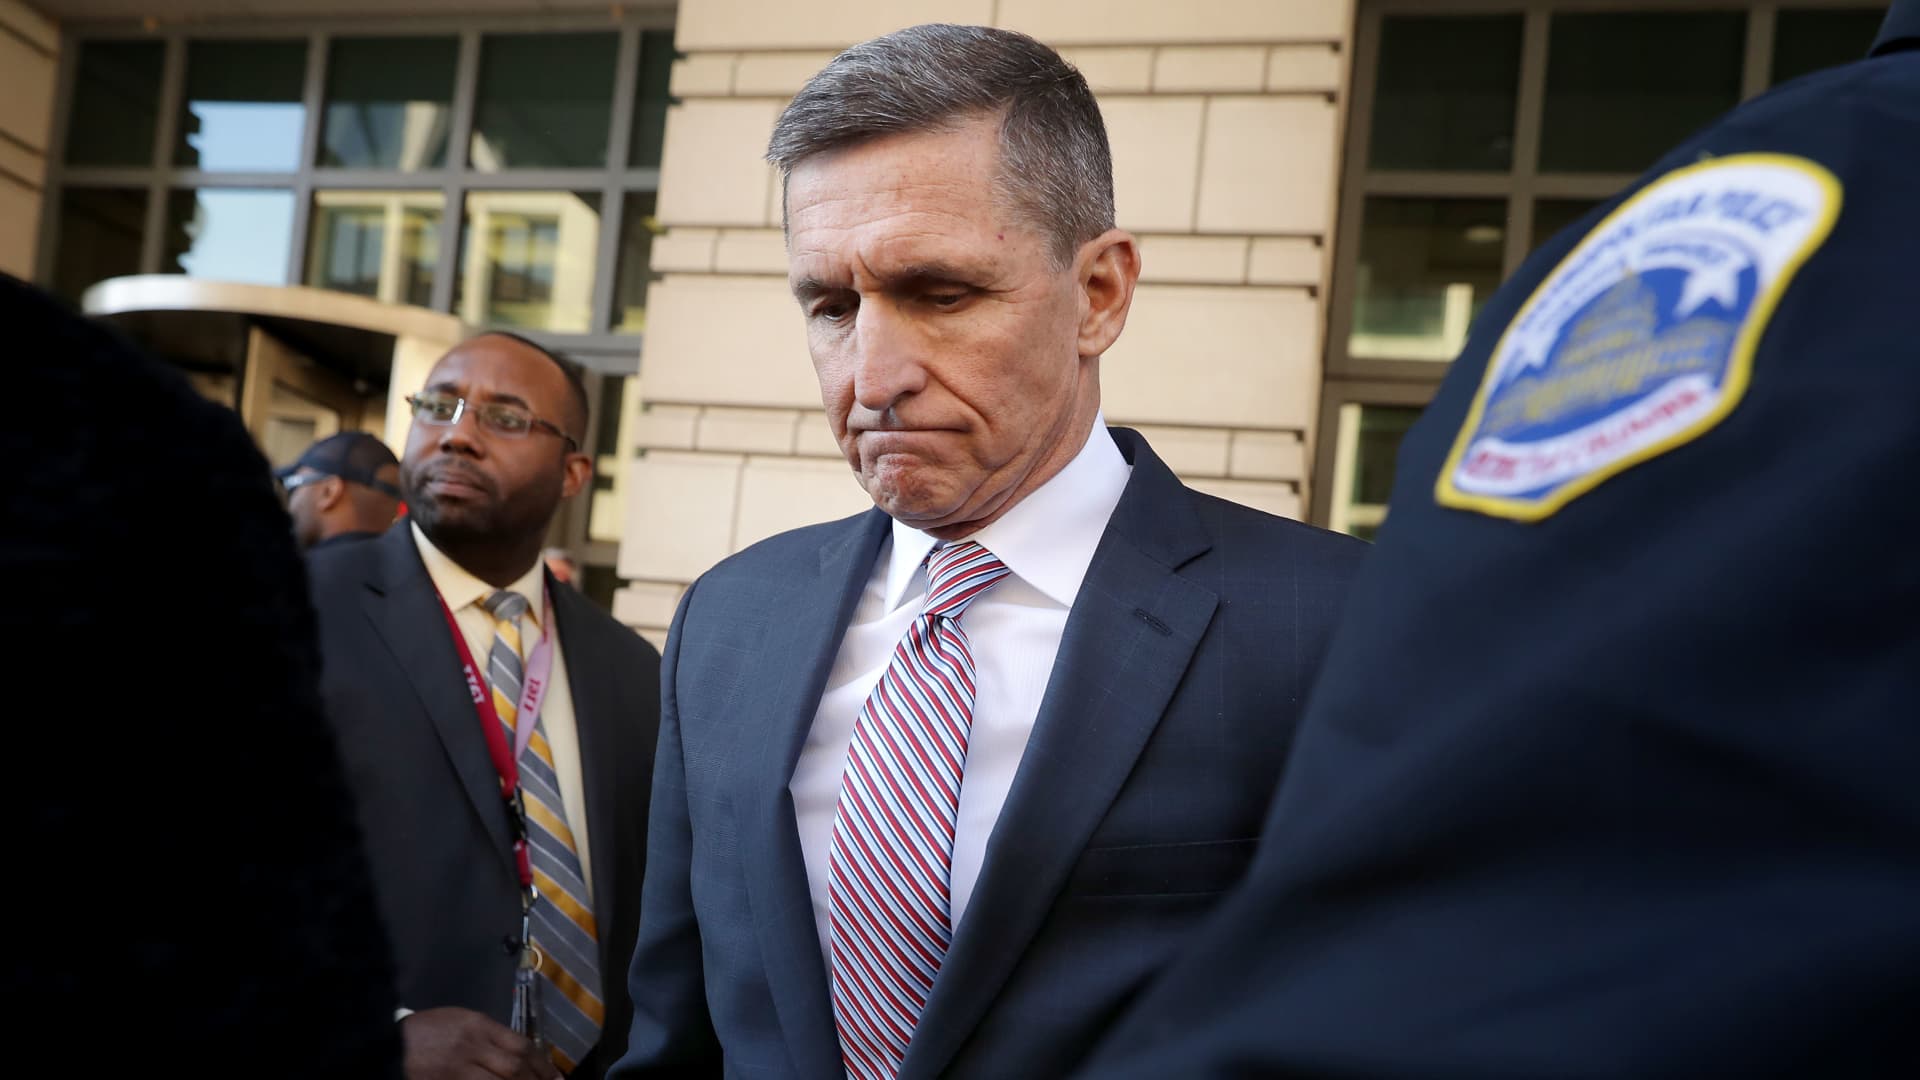 Judge to sentence former Trump aide Michael Flynn in January